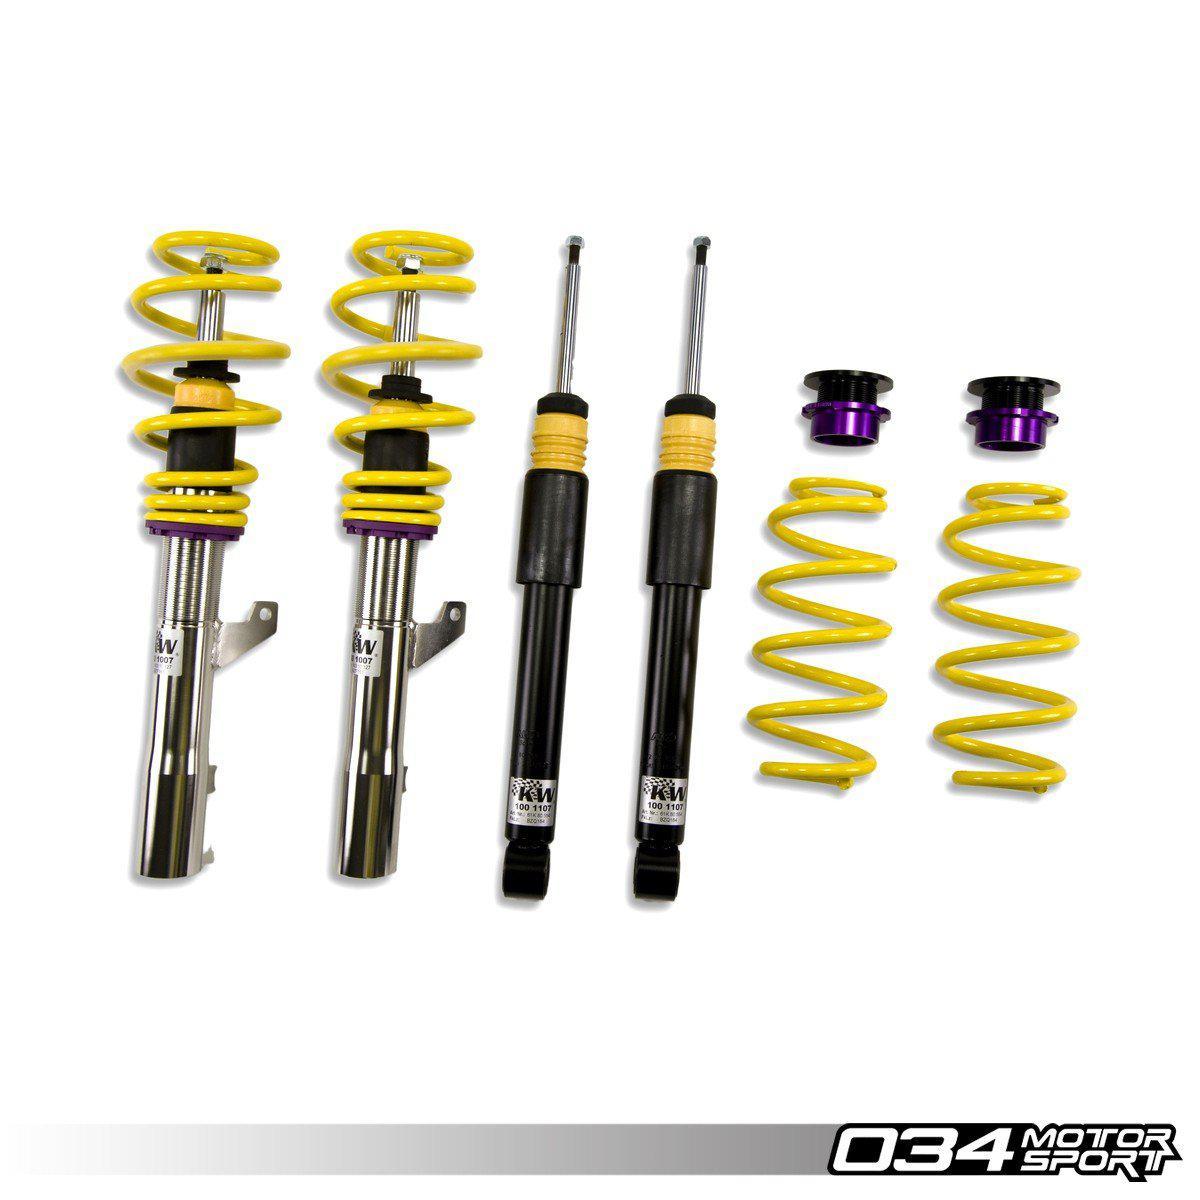 KW Variant 1 Coilover Suspension, C5 Audi A6/S6 Quattro-A Little Tuning Co